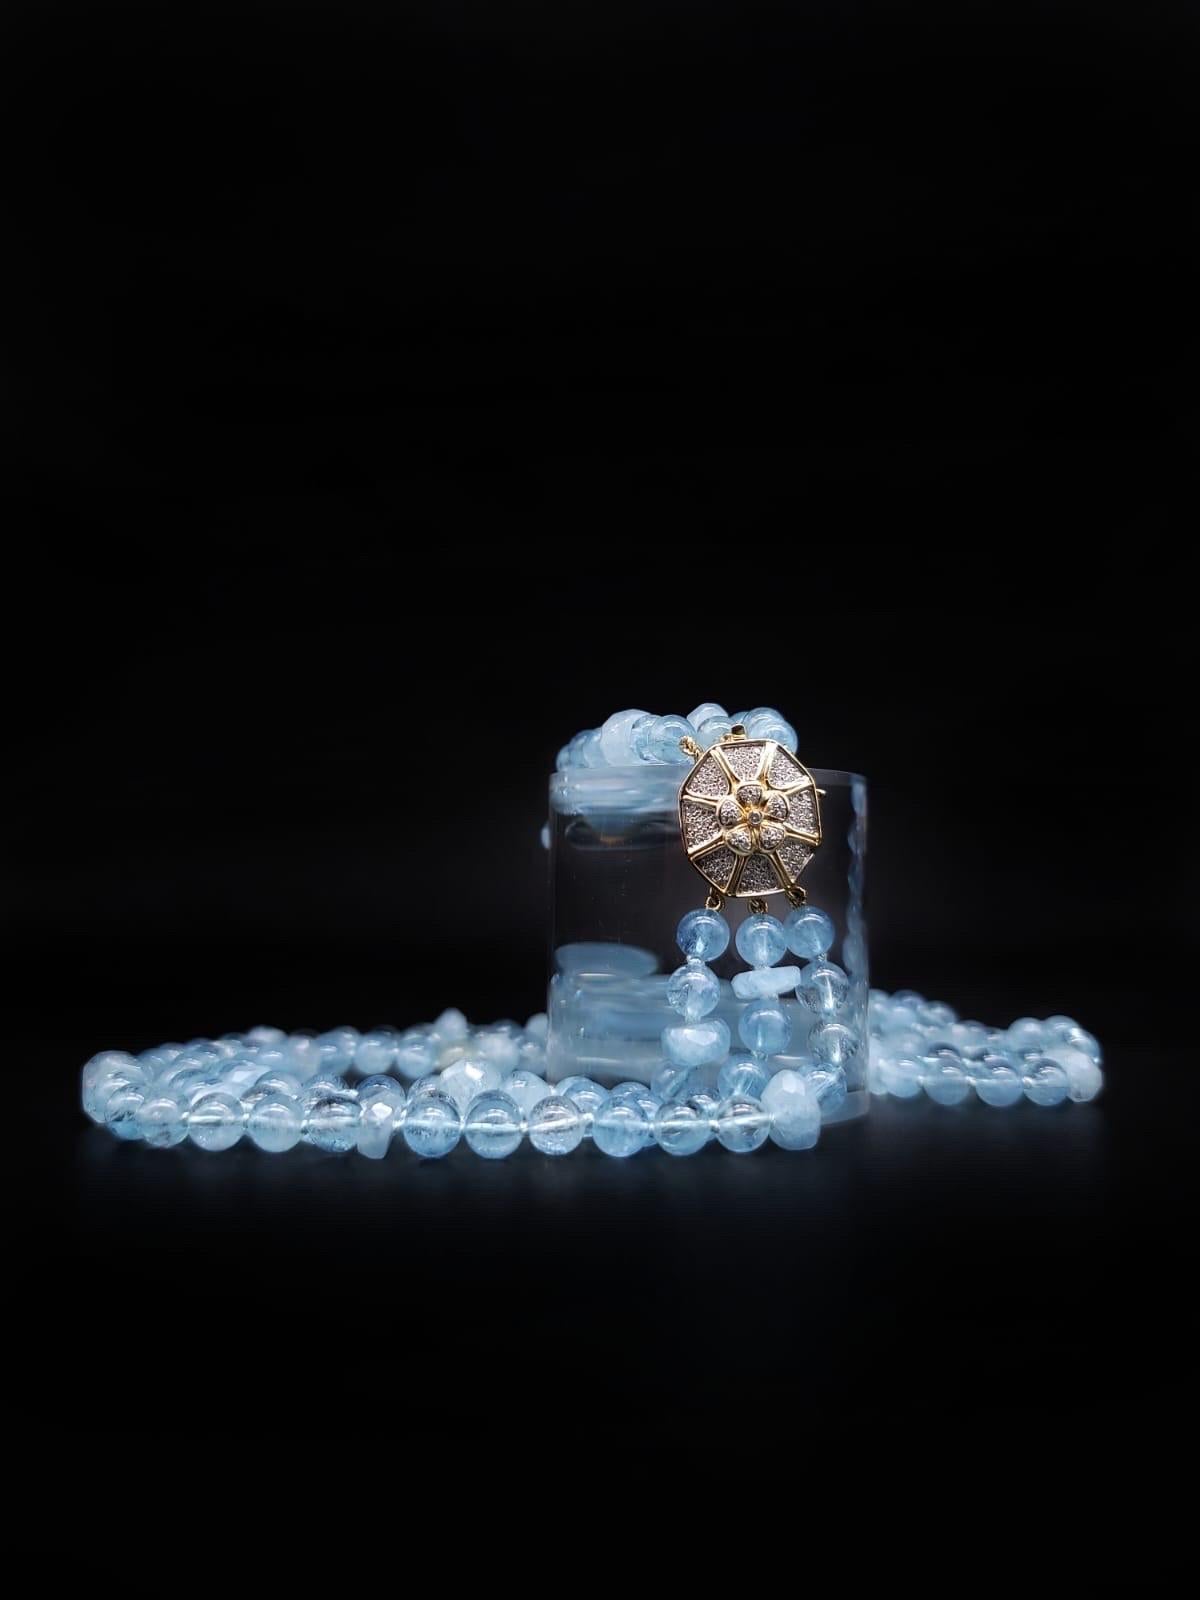 A.Jeschel AAA Aquamarine necklace with a 14k Gold Diamond clasp. 9